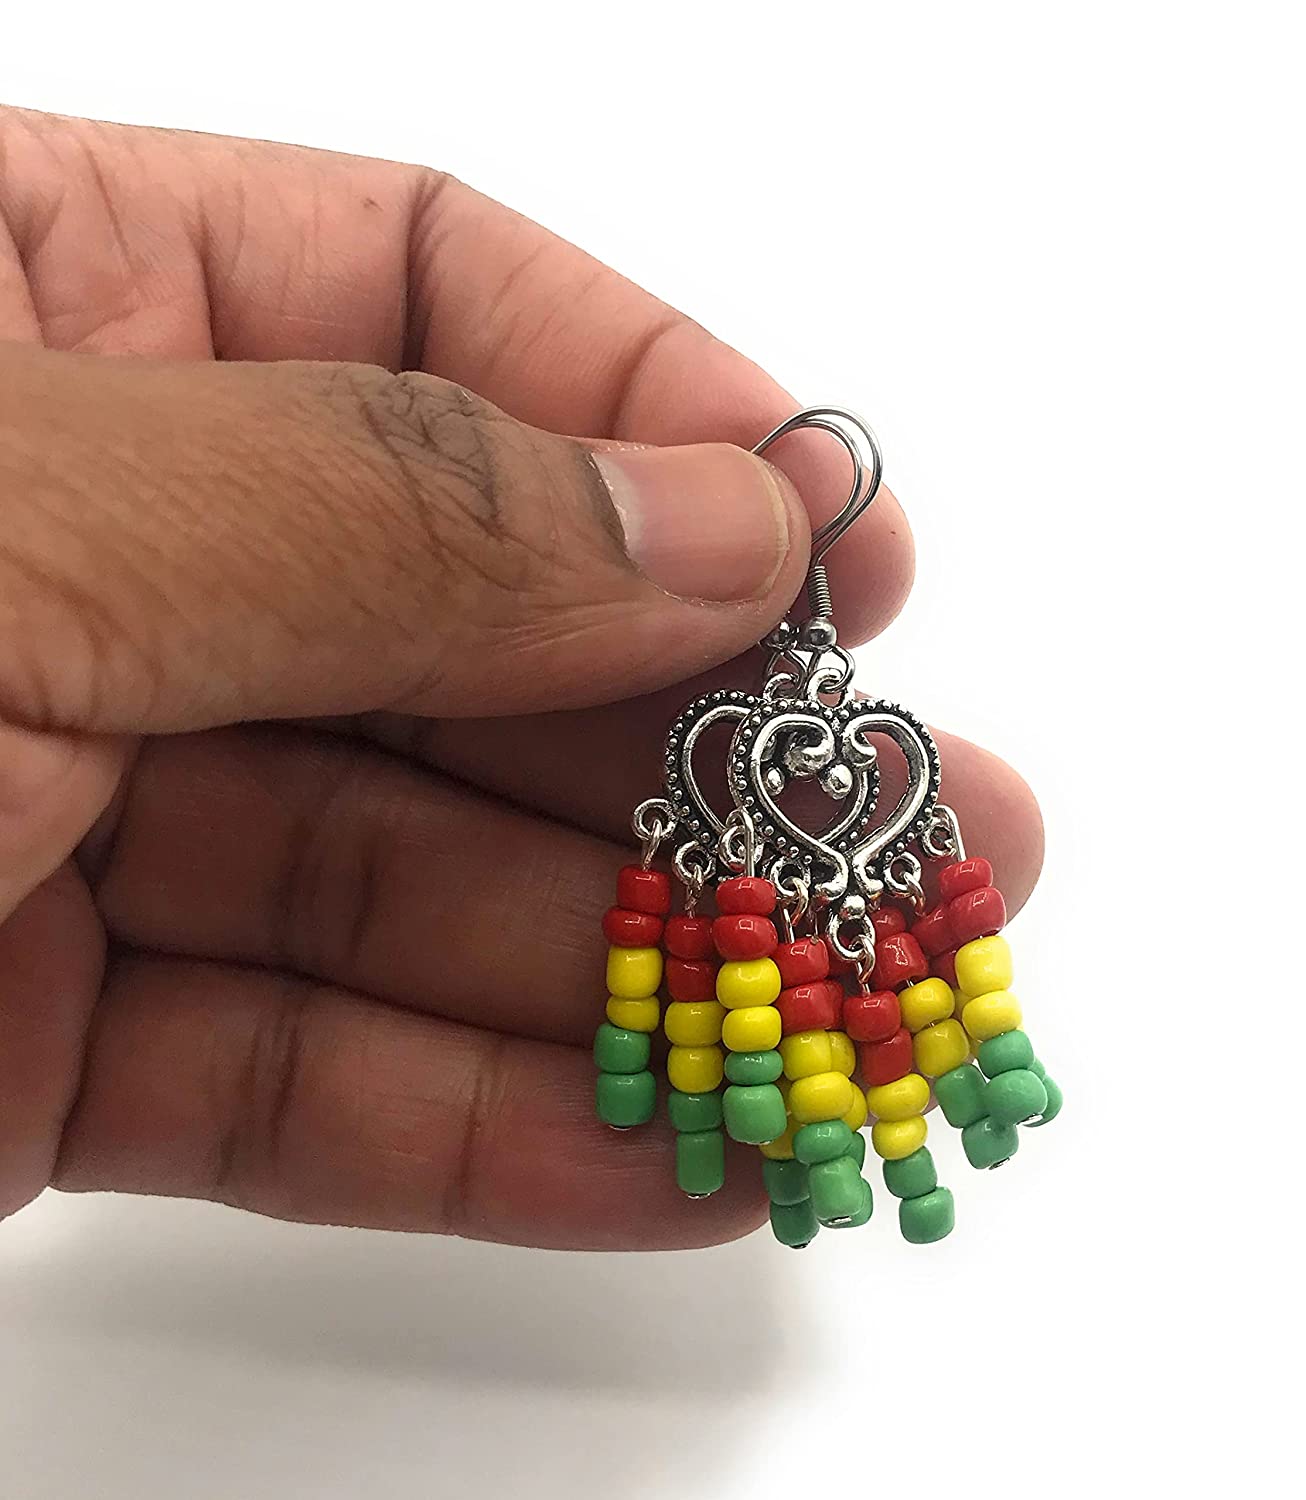 Rasta earrings in red yellow and green dangling by the fingertips from Scott D Jewelry Designs